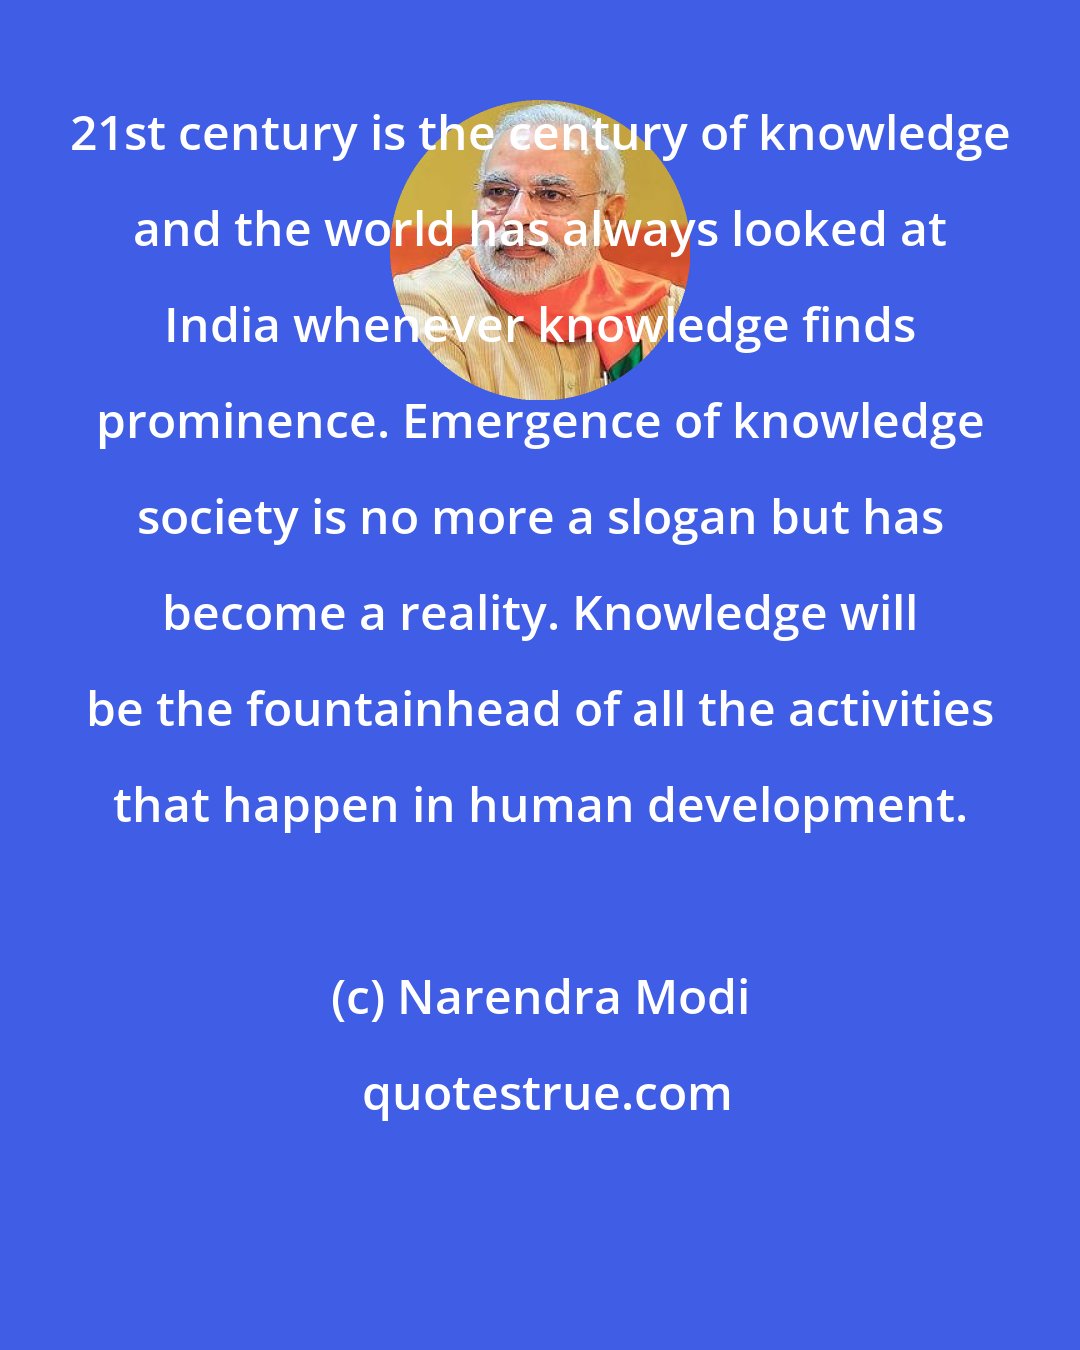 Narendra Modi: 21st century is the century of knowledge and the world has always looked at India whenever knowledge finds prominence. Emergence of knowledge society is no more a slogan but has become a reality. Knowledge will be the fountainhead of all the activities that happen in human development.